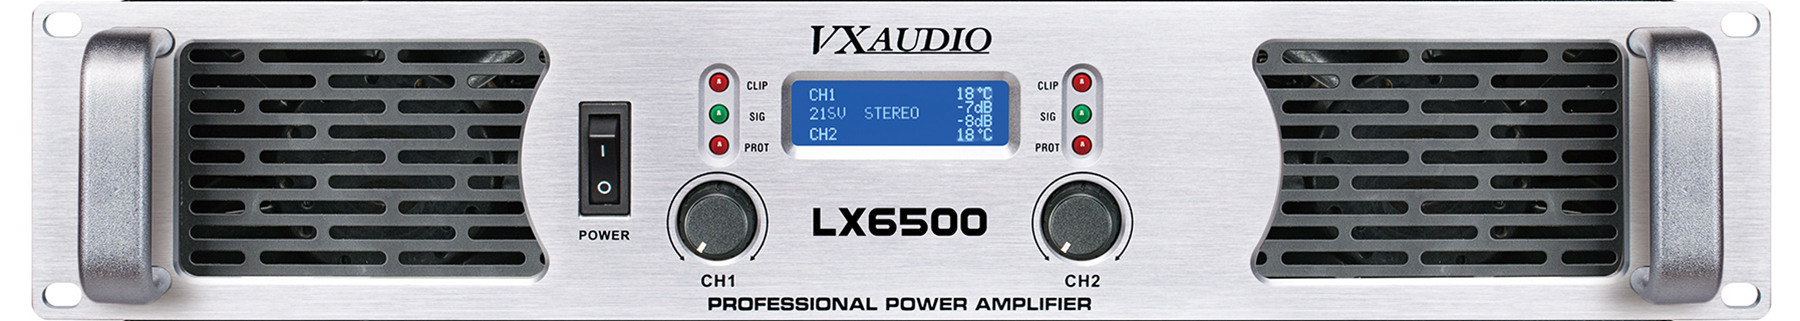 High Power Output Prossfessional Amplifier (LX 6500)